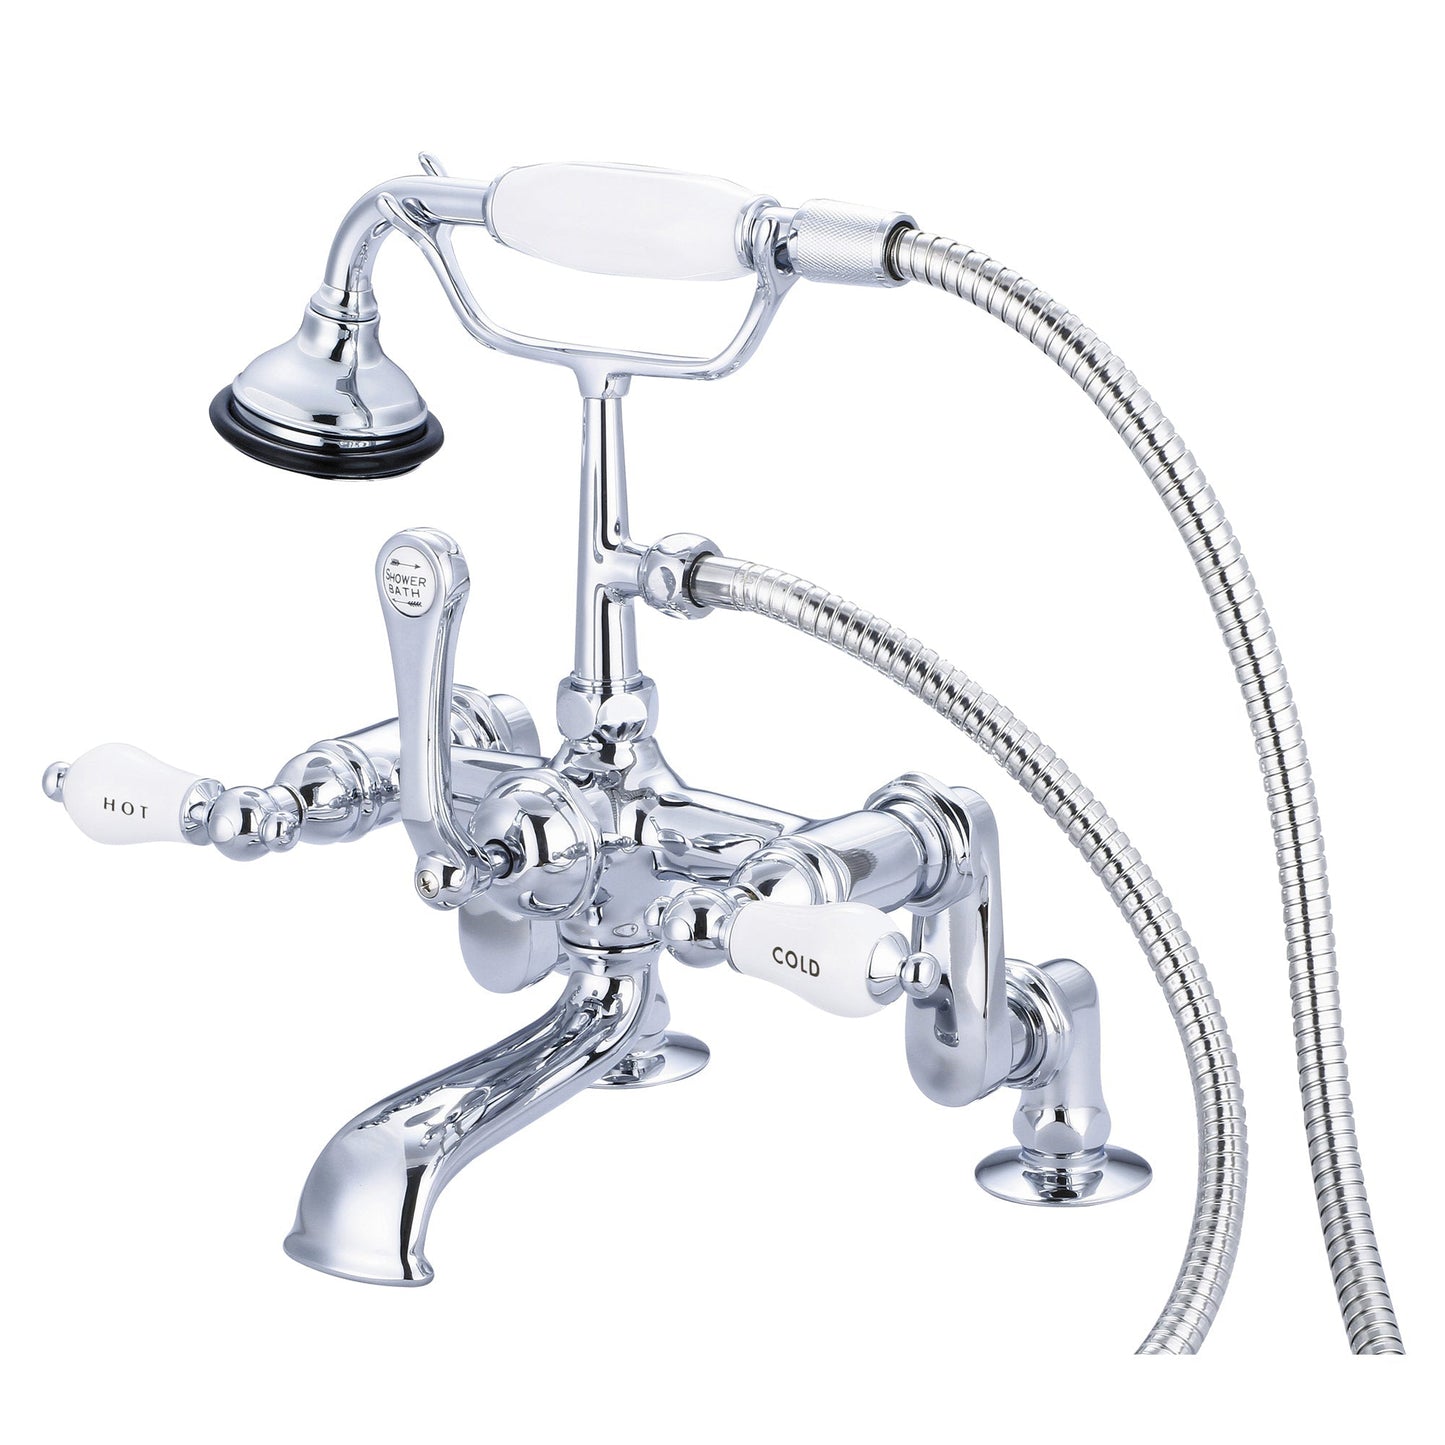 Water Creation Vintage Classic Adjustable Center Deck Mount Tub F6-0008 7" Silver Solid Brass Faucet With Handheld Shower And Porcelain Lever Handles, Hot And Cold Labels Included